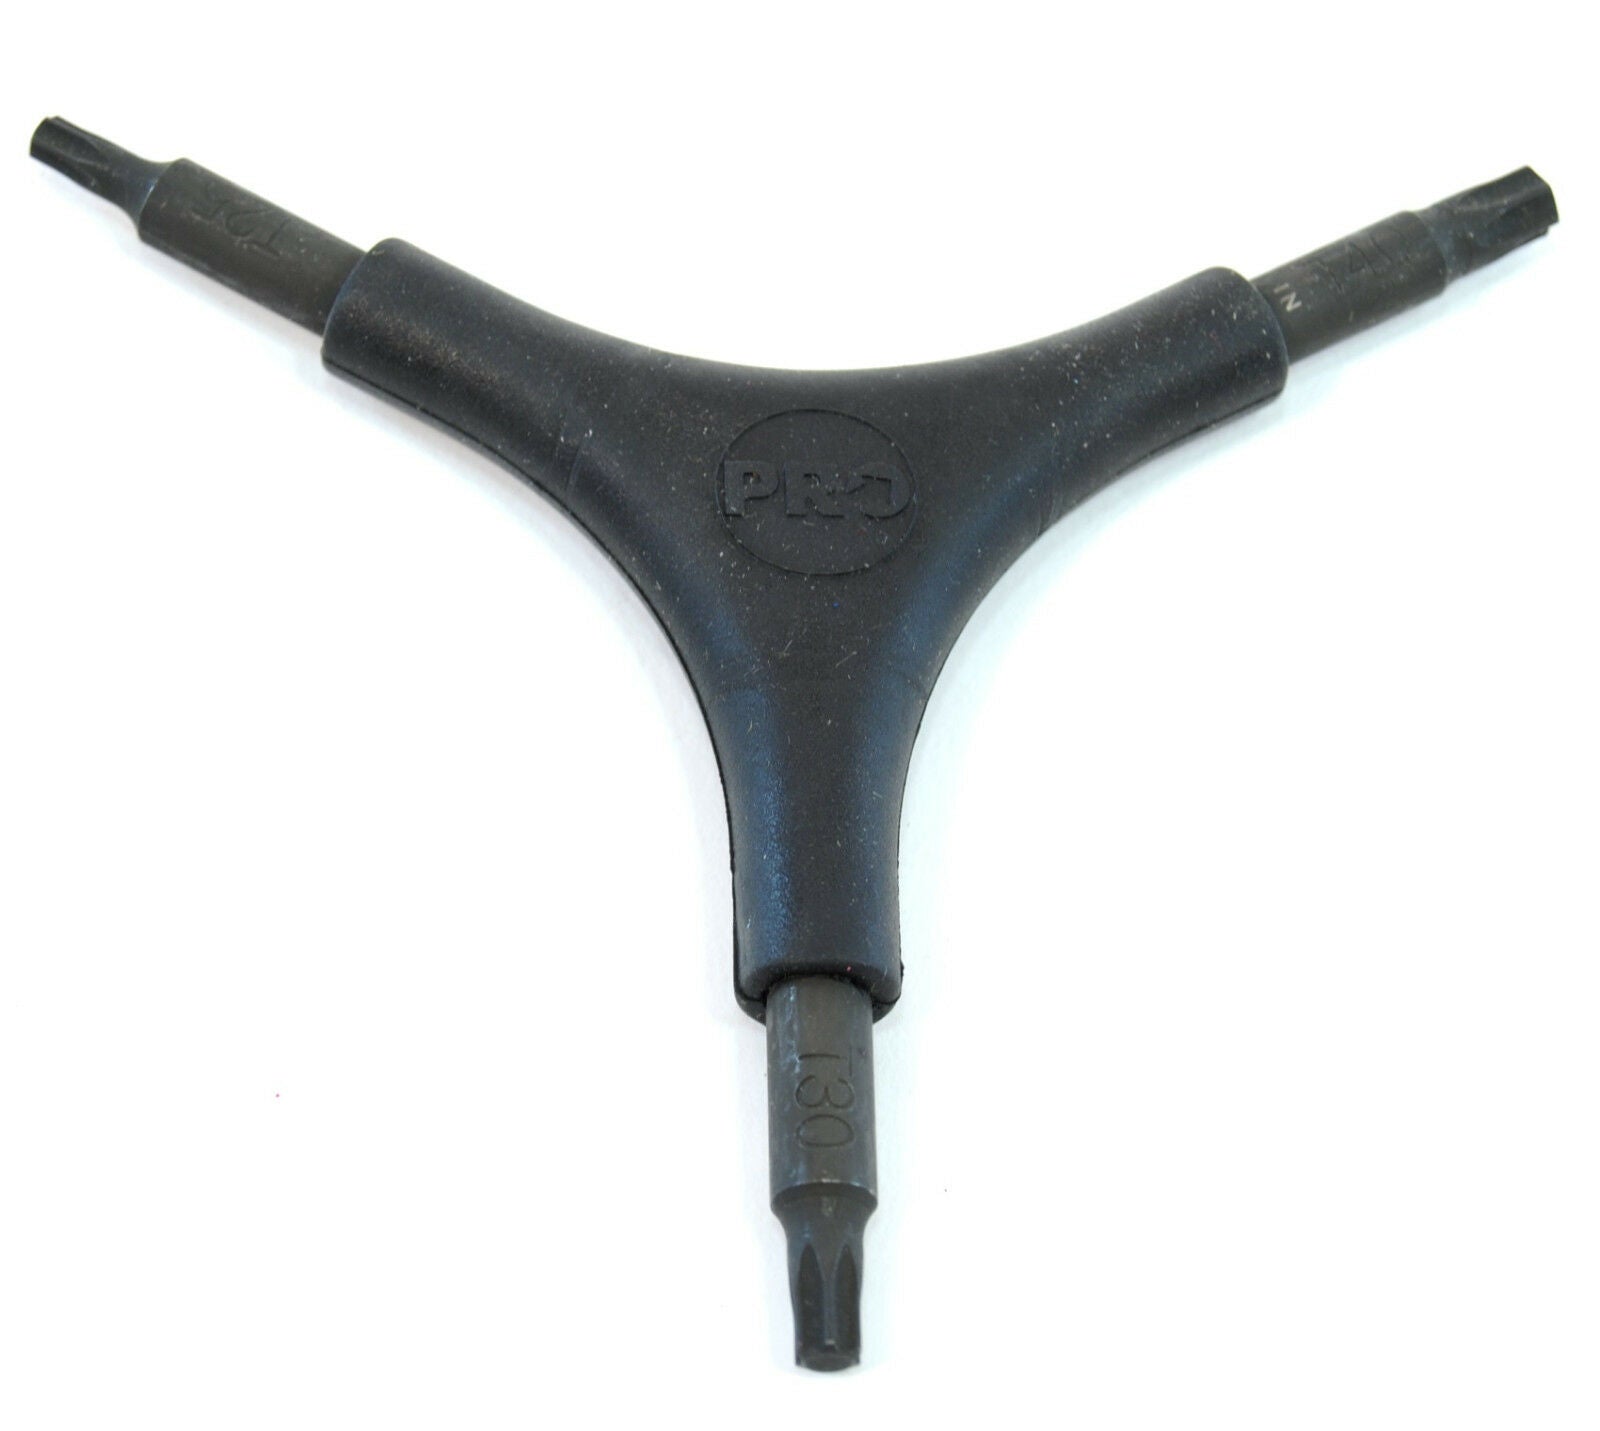 Shimano Y-Wrench Torx Tool